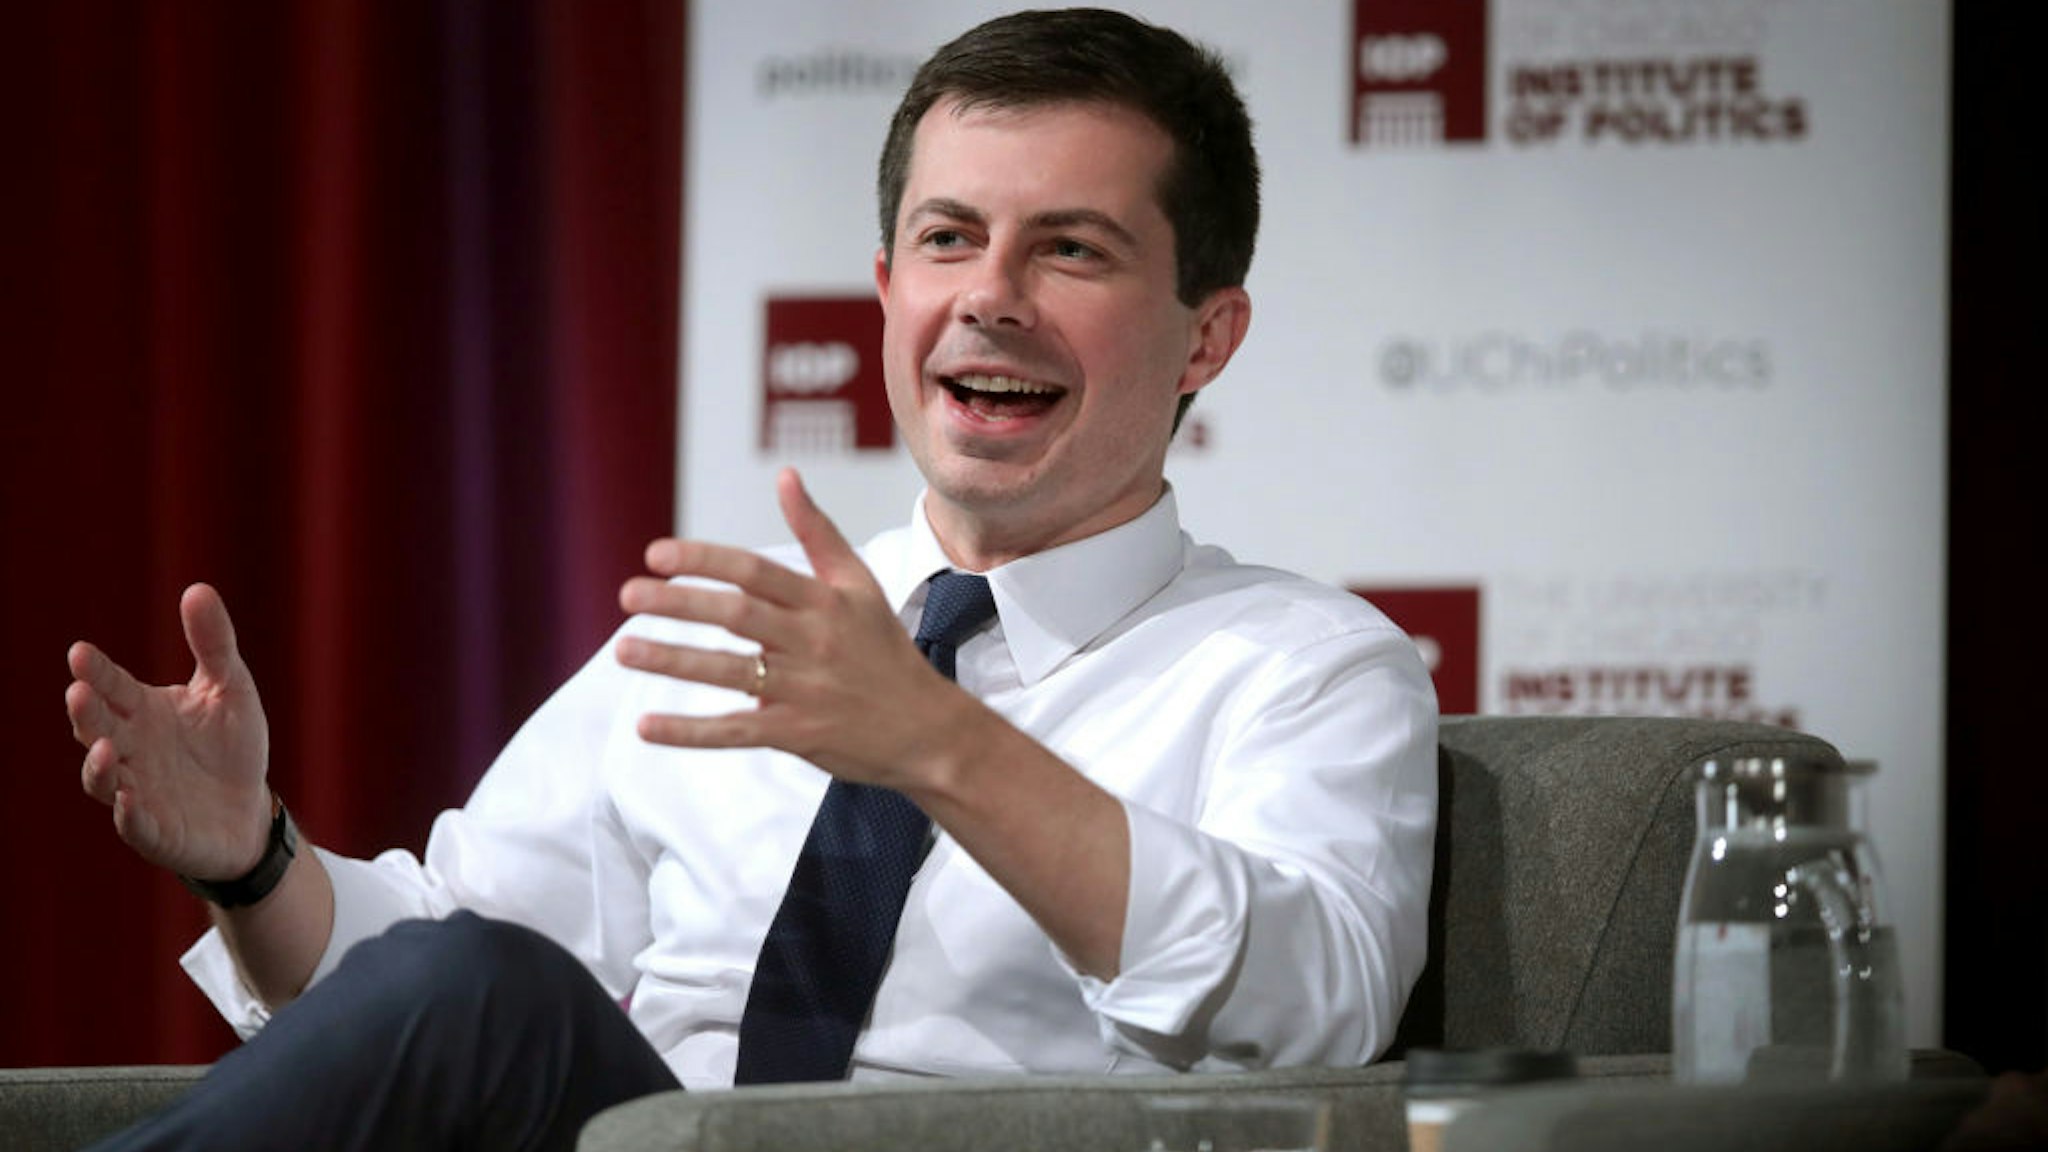 Pete Buttigieg answers questions during a visit to the University of Chicago